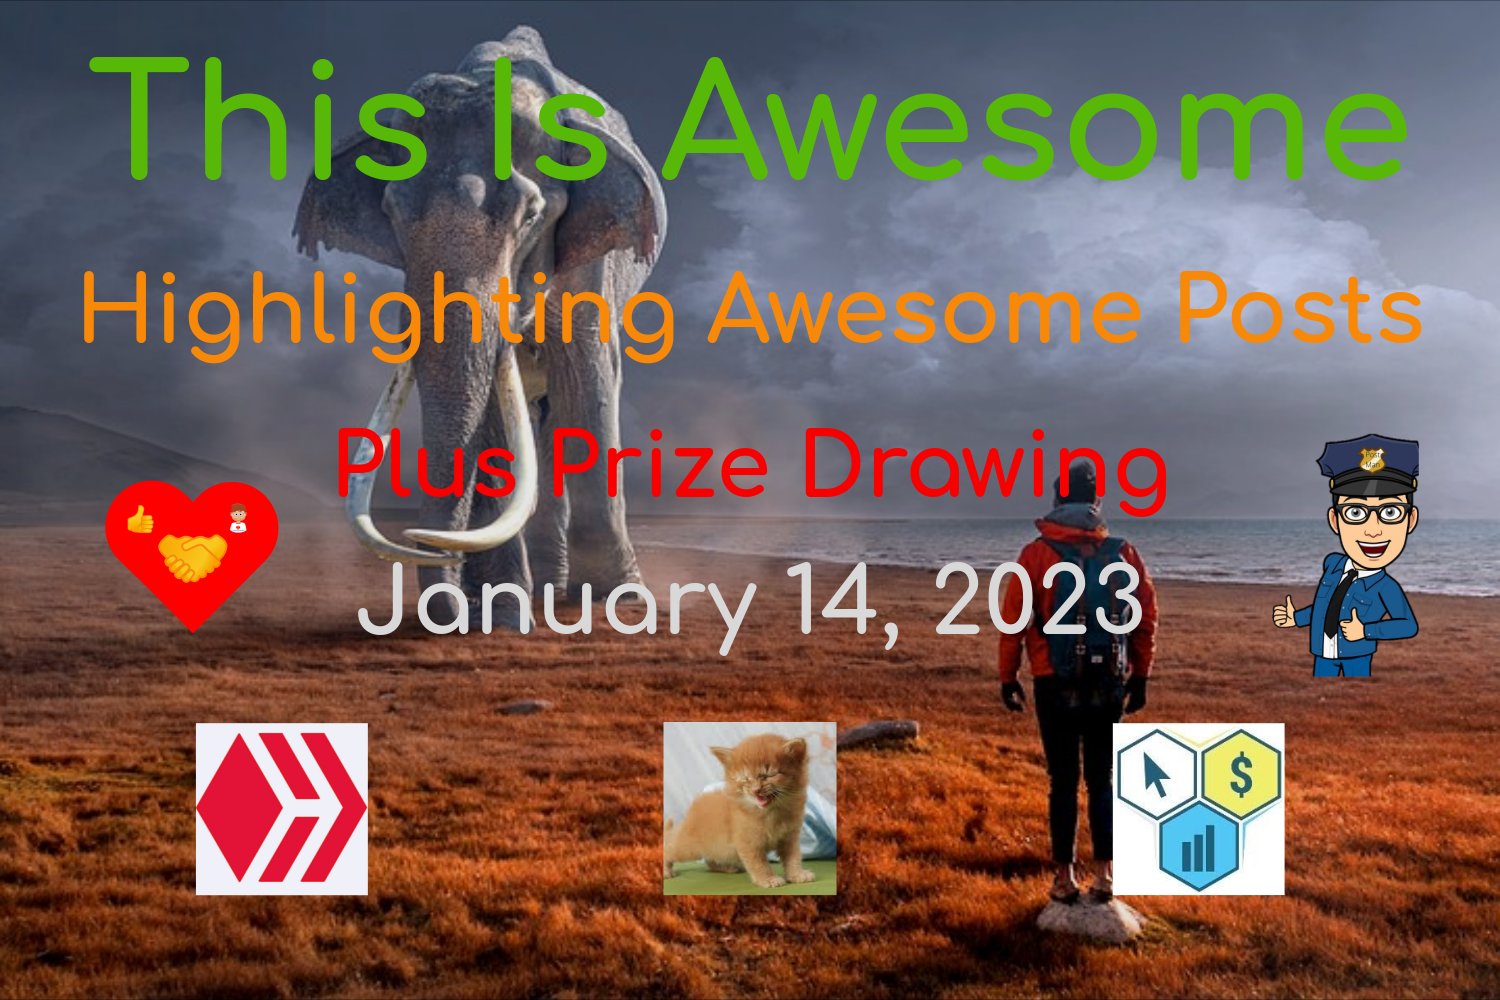 @thisisawesome/this-is-awesome-highlighting-awesome-posts-plus-prize-drawing-january-14-2023